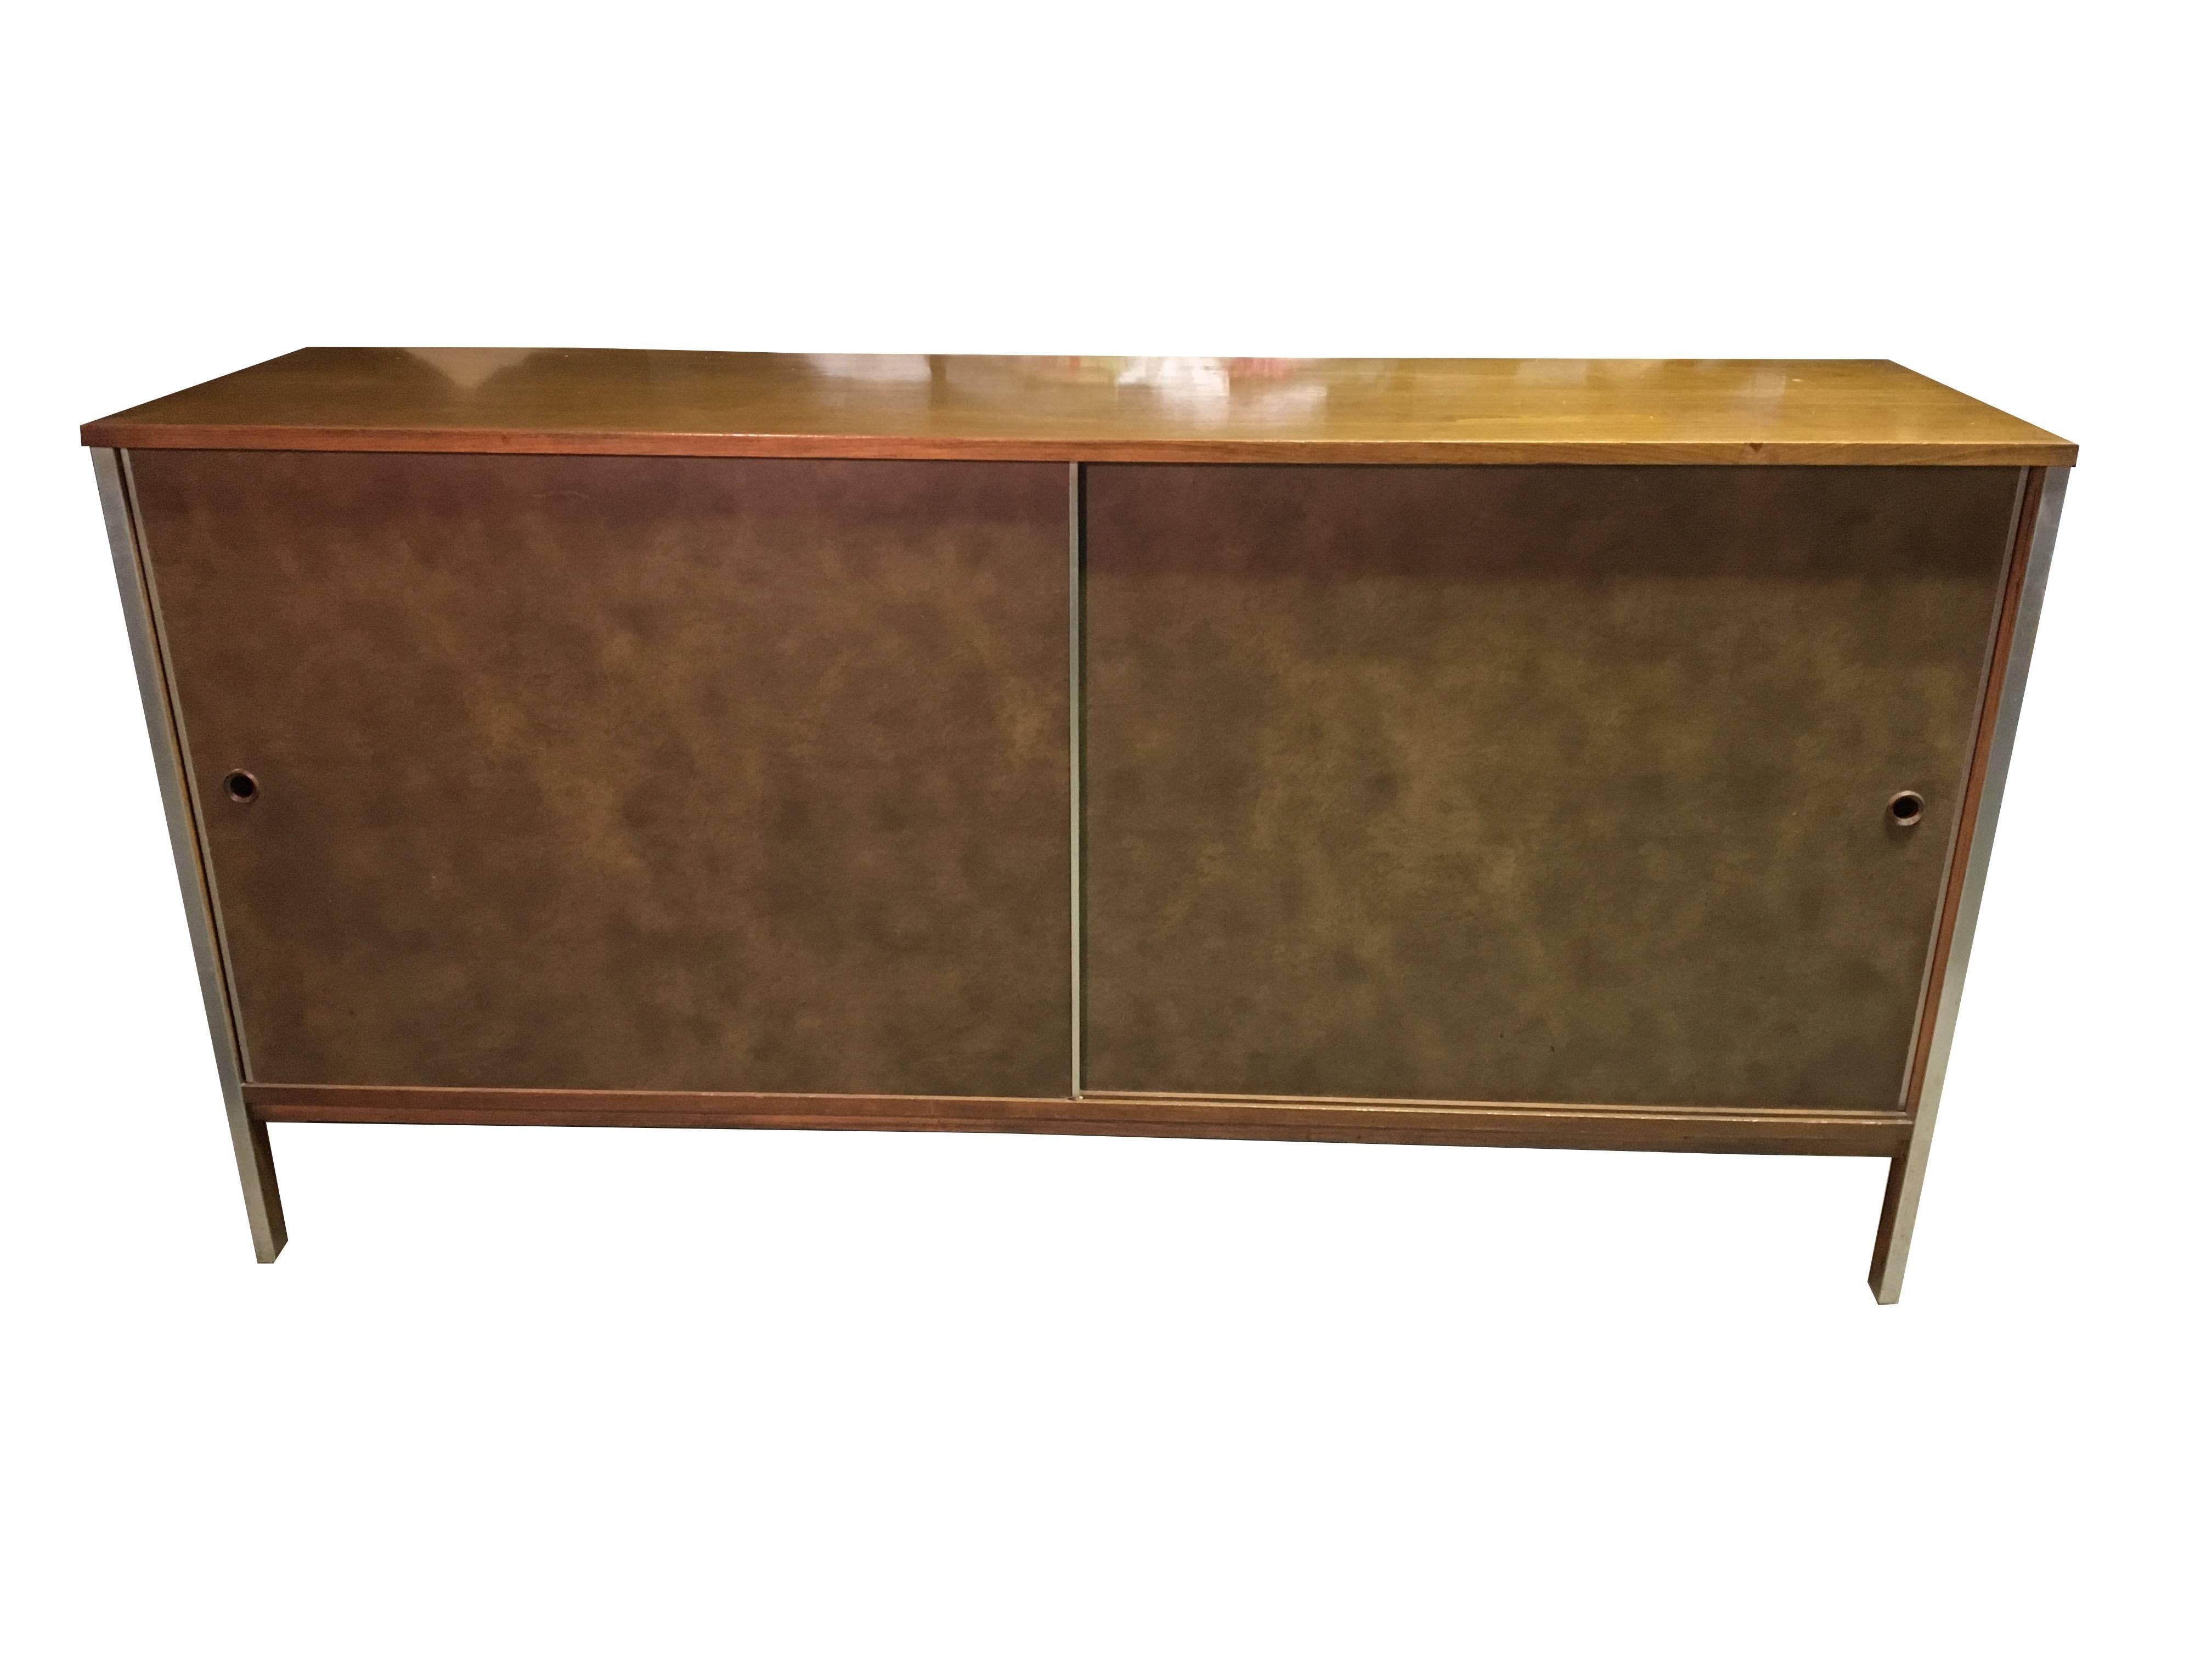 Beautiful Paul McCobb credenza comprised of clean lines and simple yet smart design. Walnut and aluminum with vinyl covered sliding doors. Designed for the Calvin.